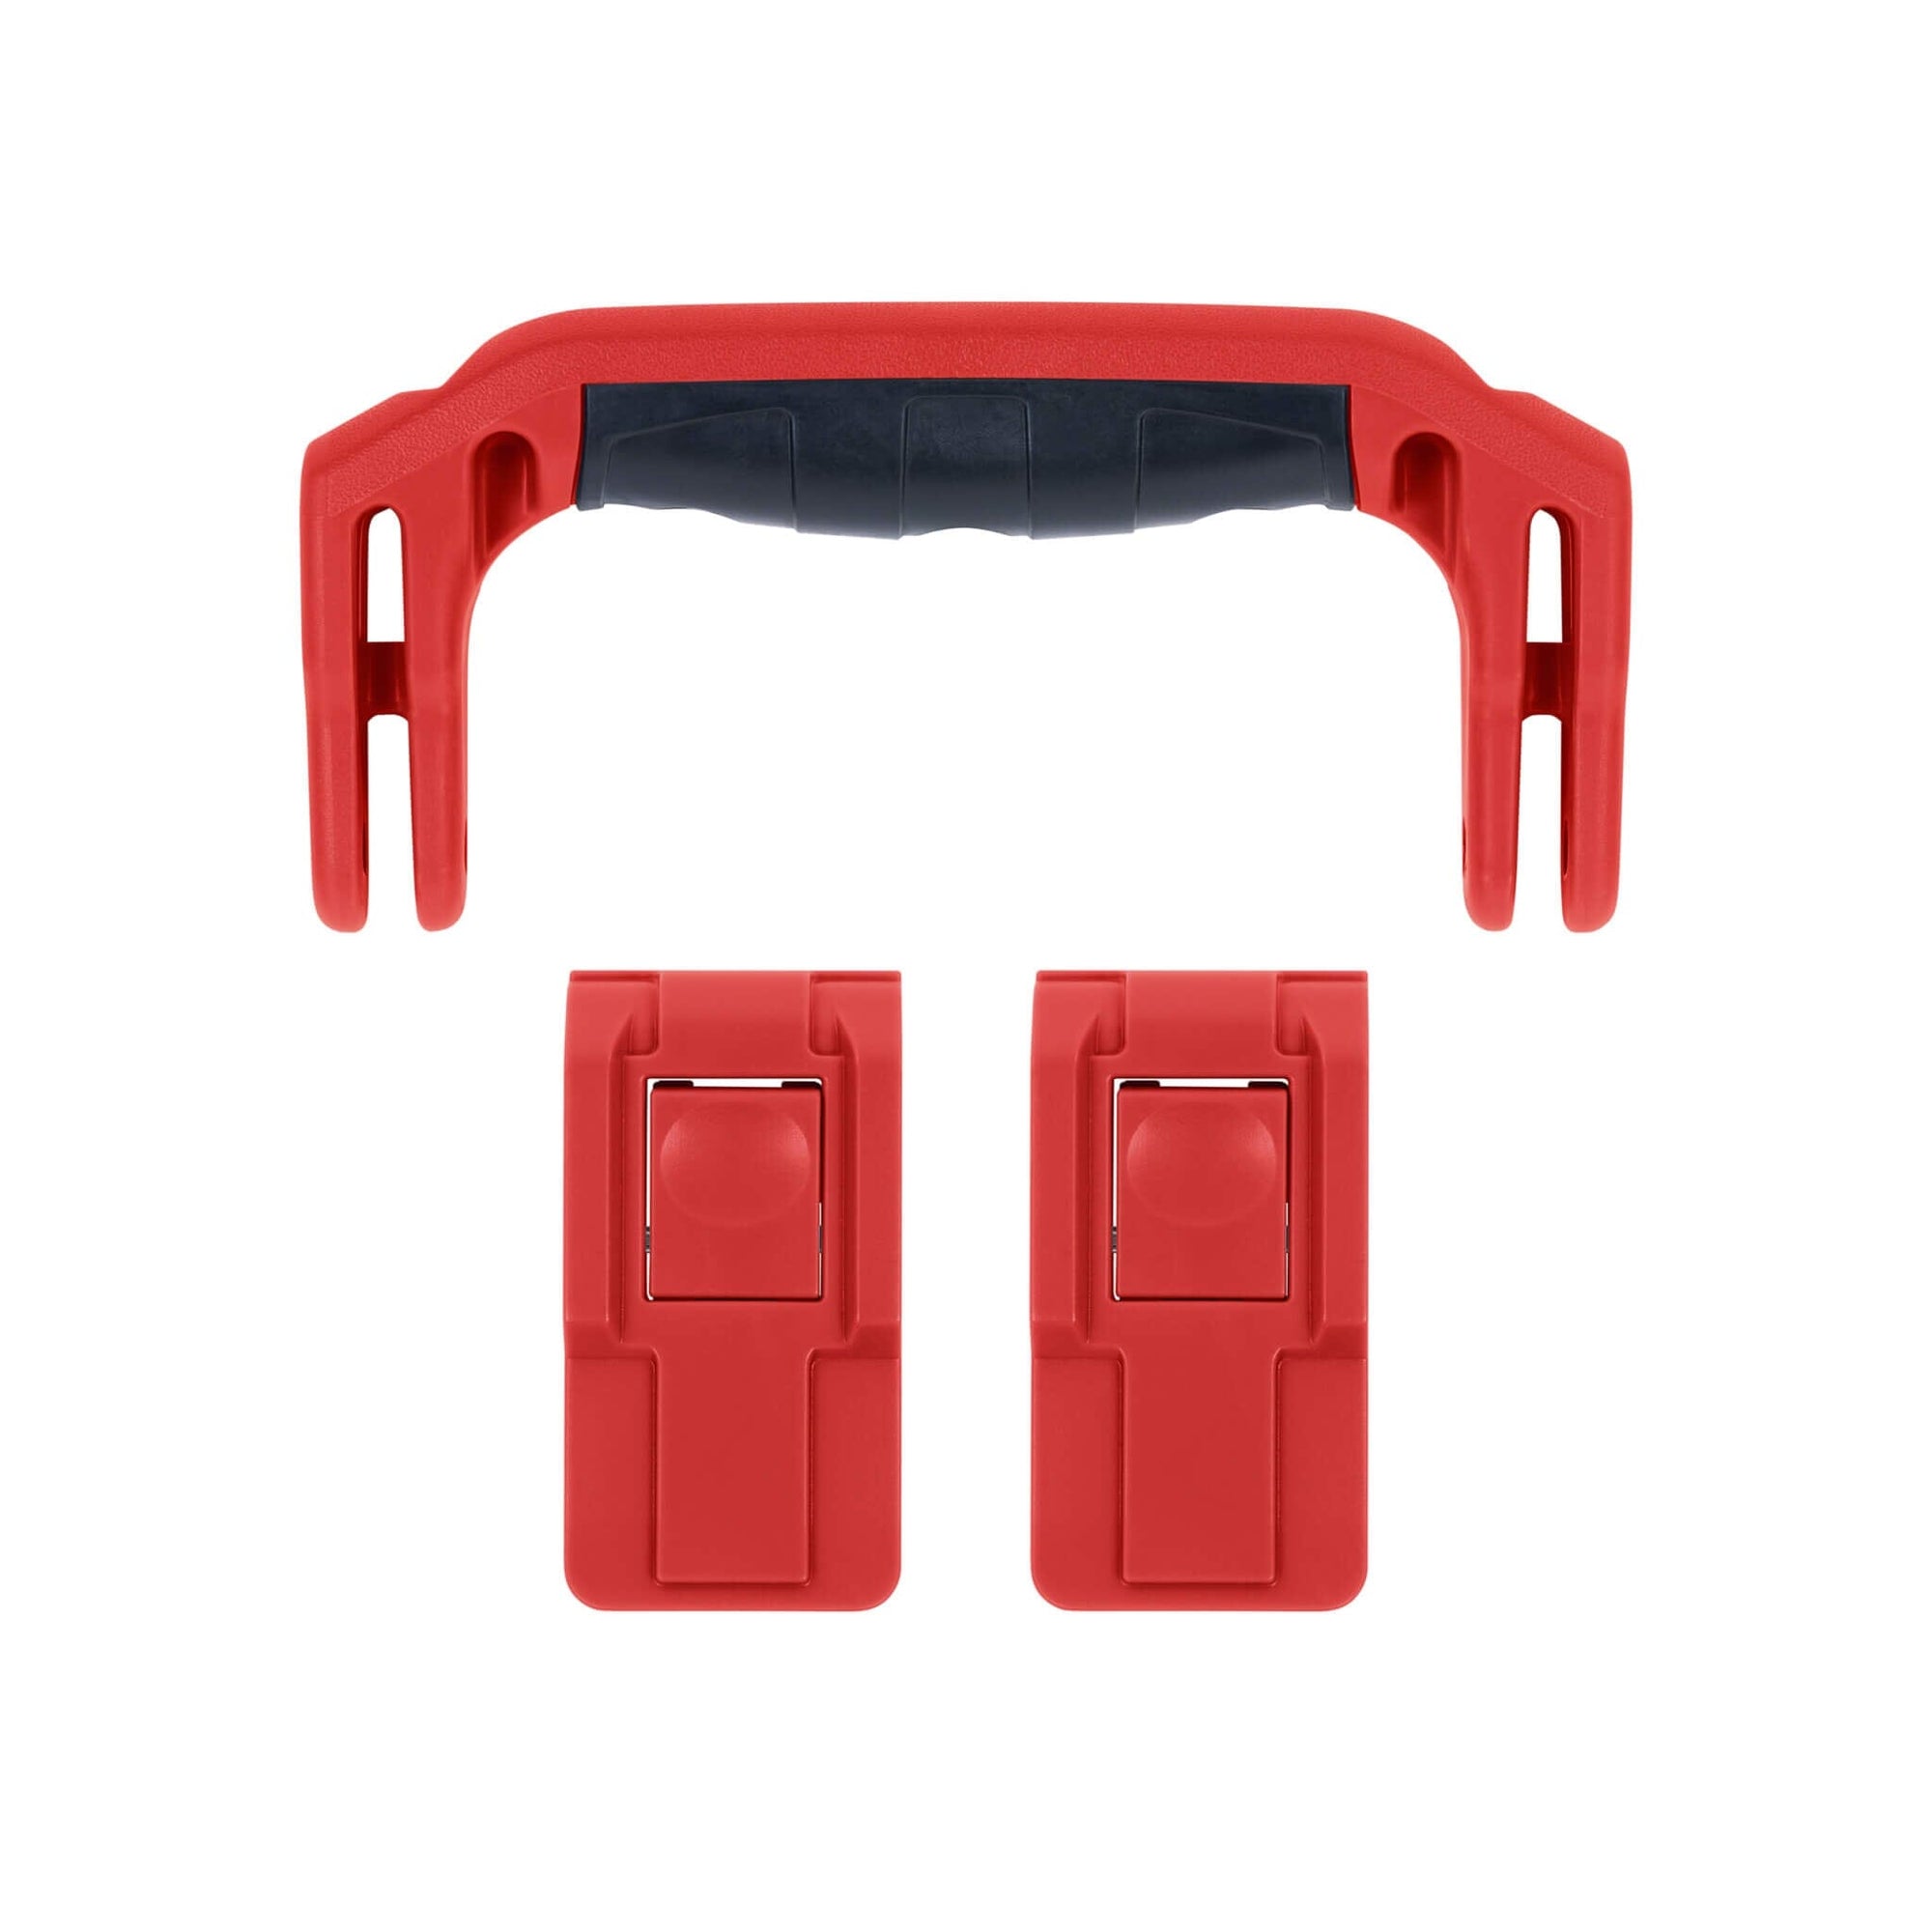 Pelican 1507 Air Replacement Handle & Latches, Red (Set of 1 Handle, 2 Latches) ColorCase 